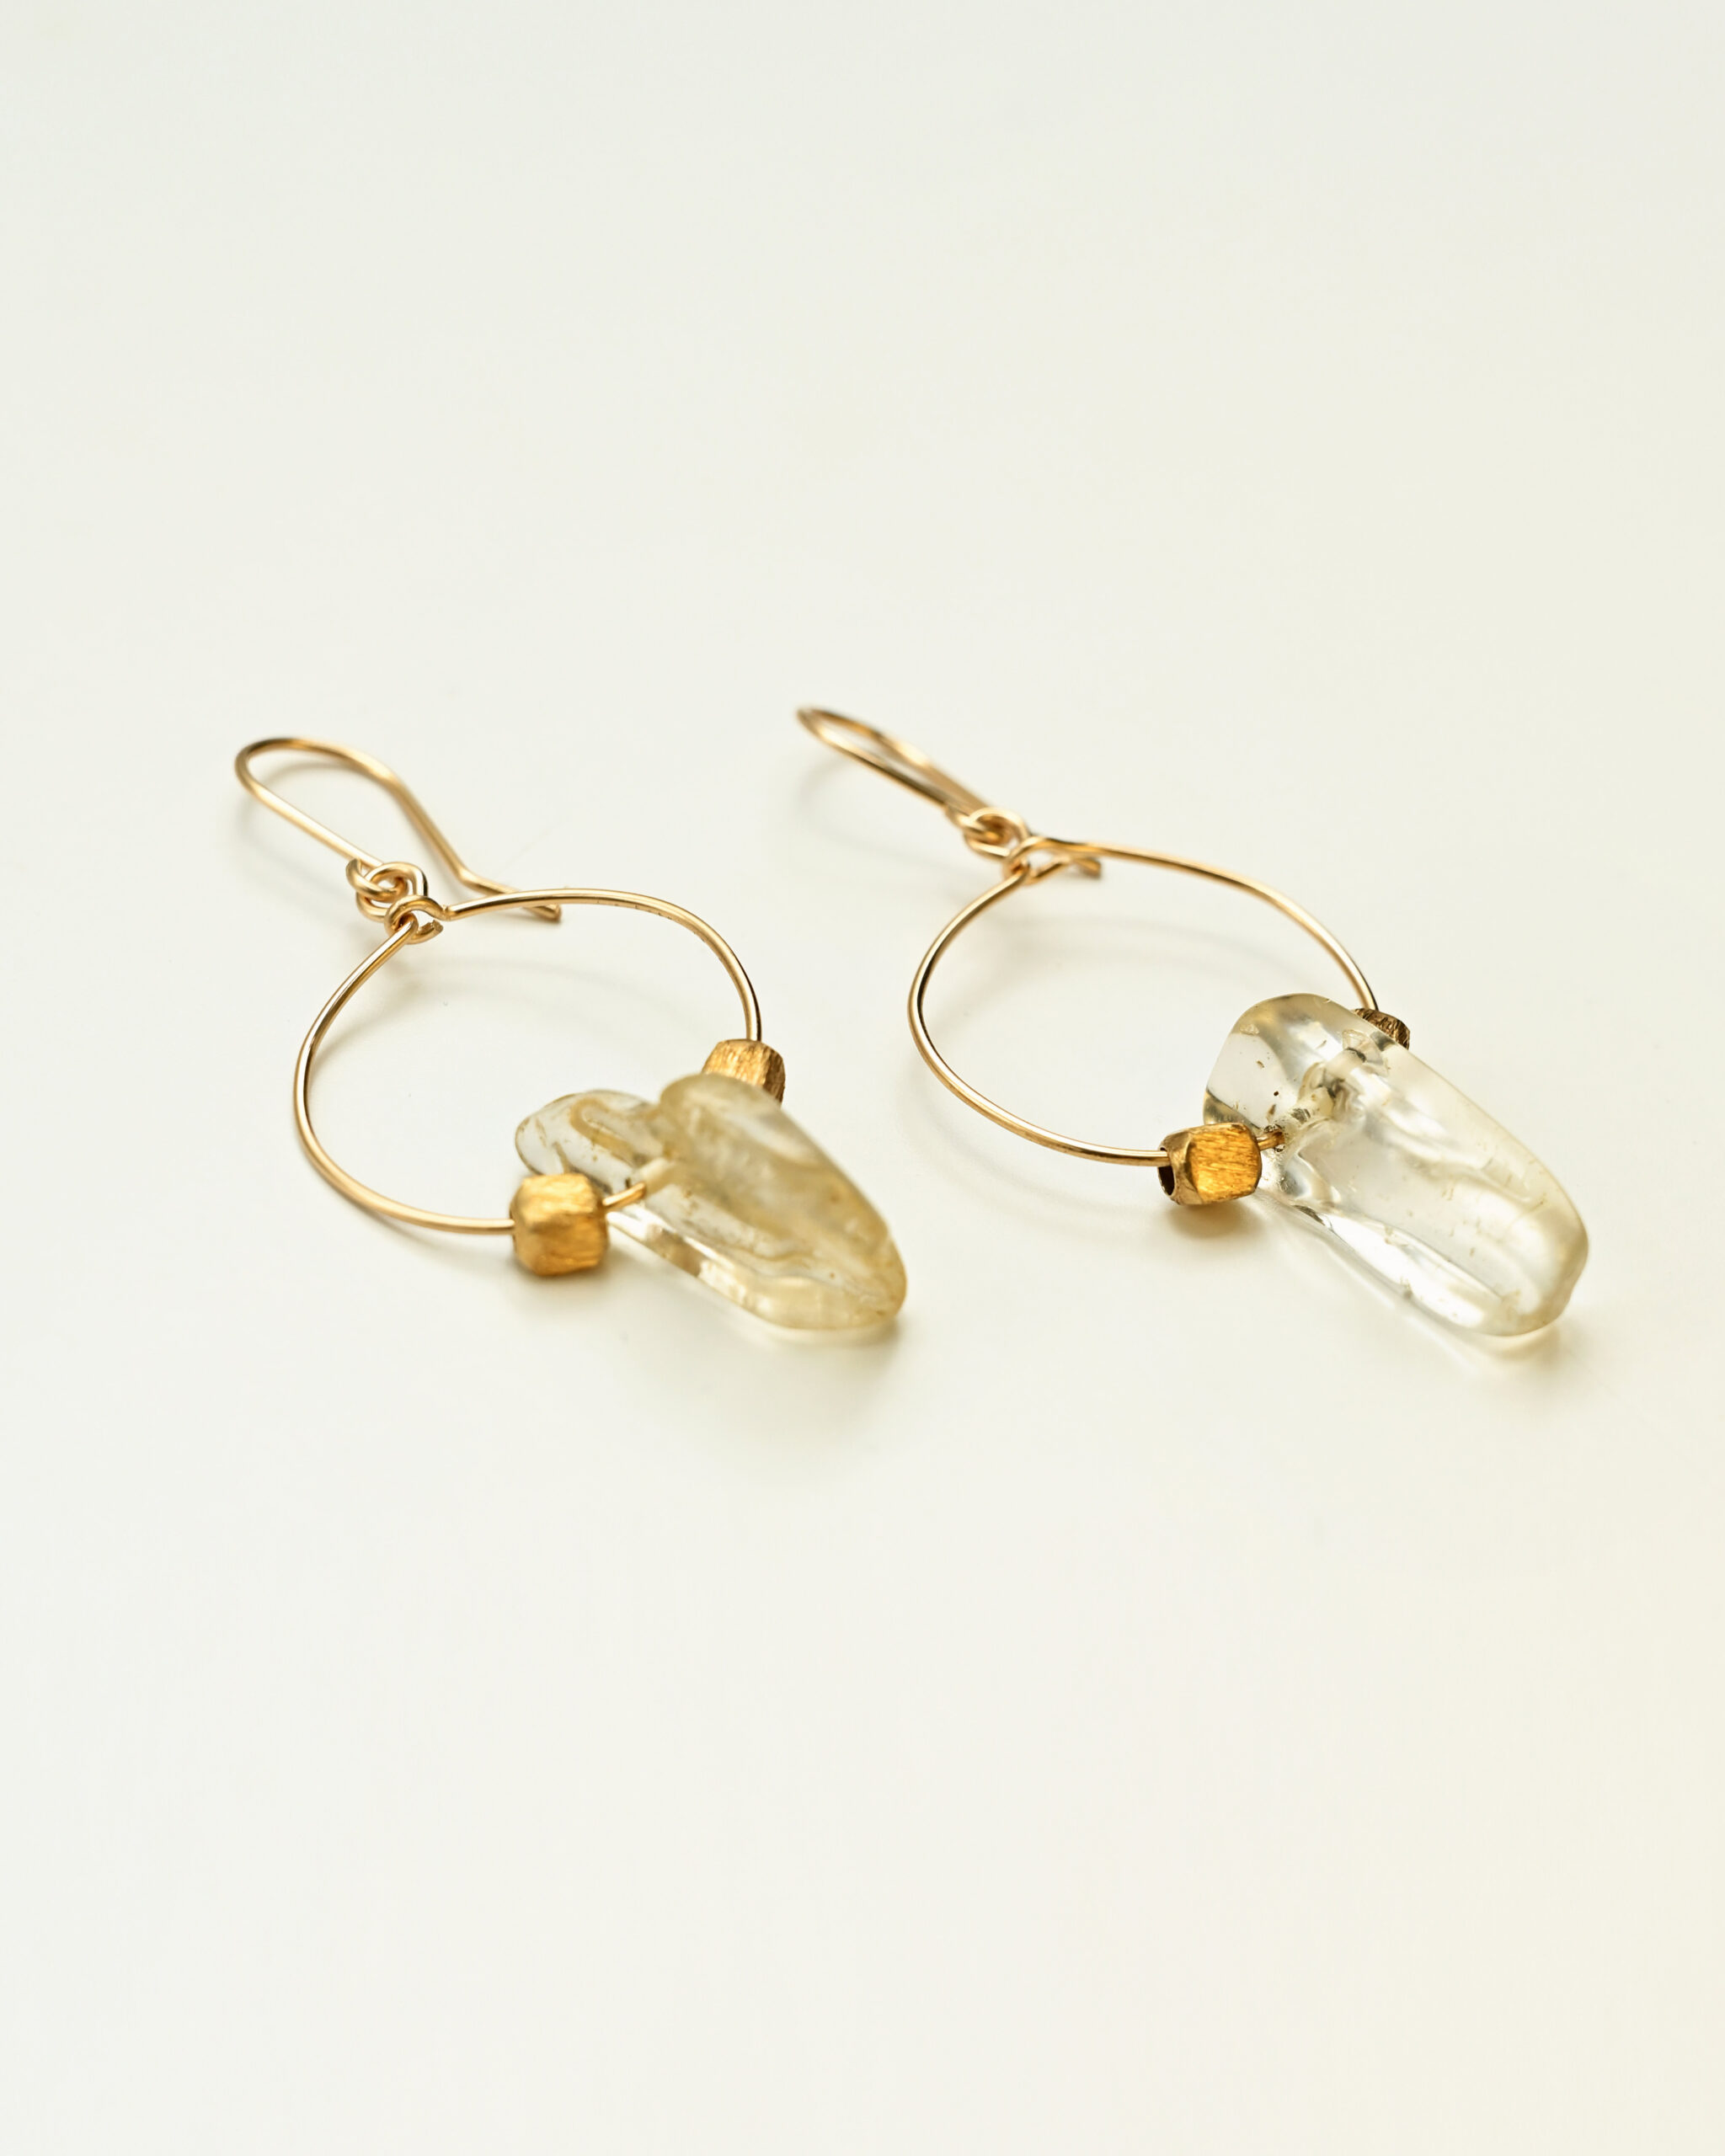 14k gold filled hoop earrings with citrine gemstone and 14k gold plated sterling silver elements